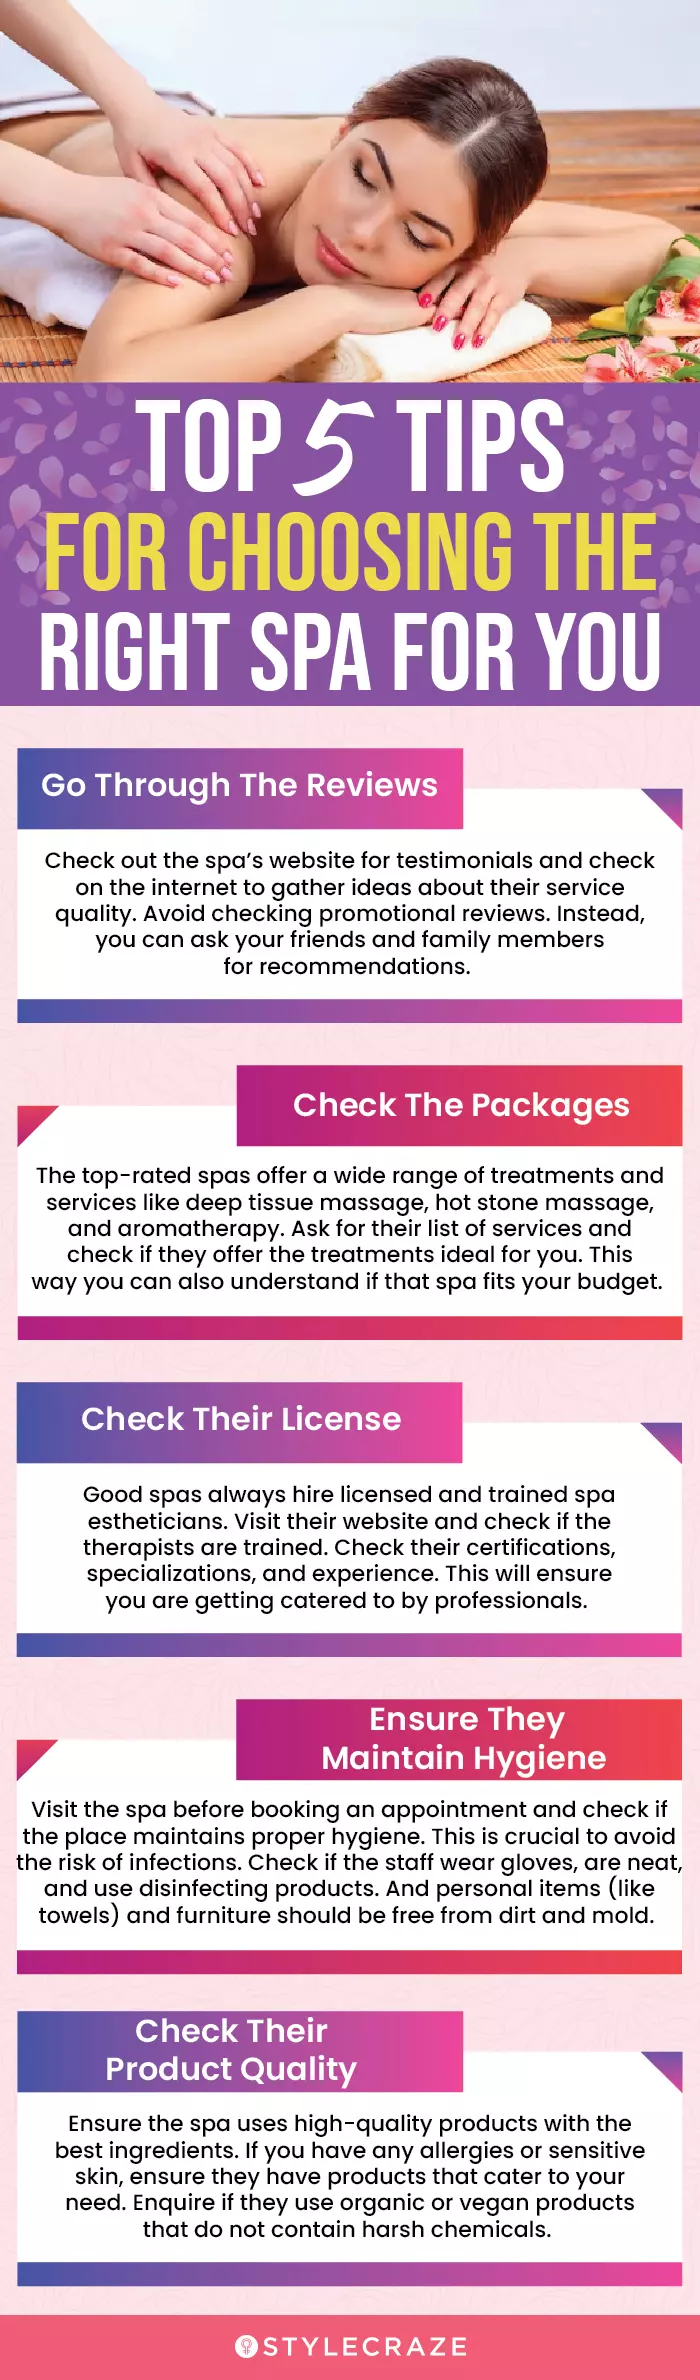 top 5 tips for choosing the right spa for you (infographic)